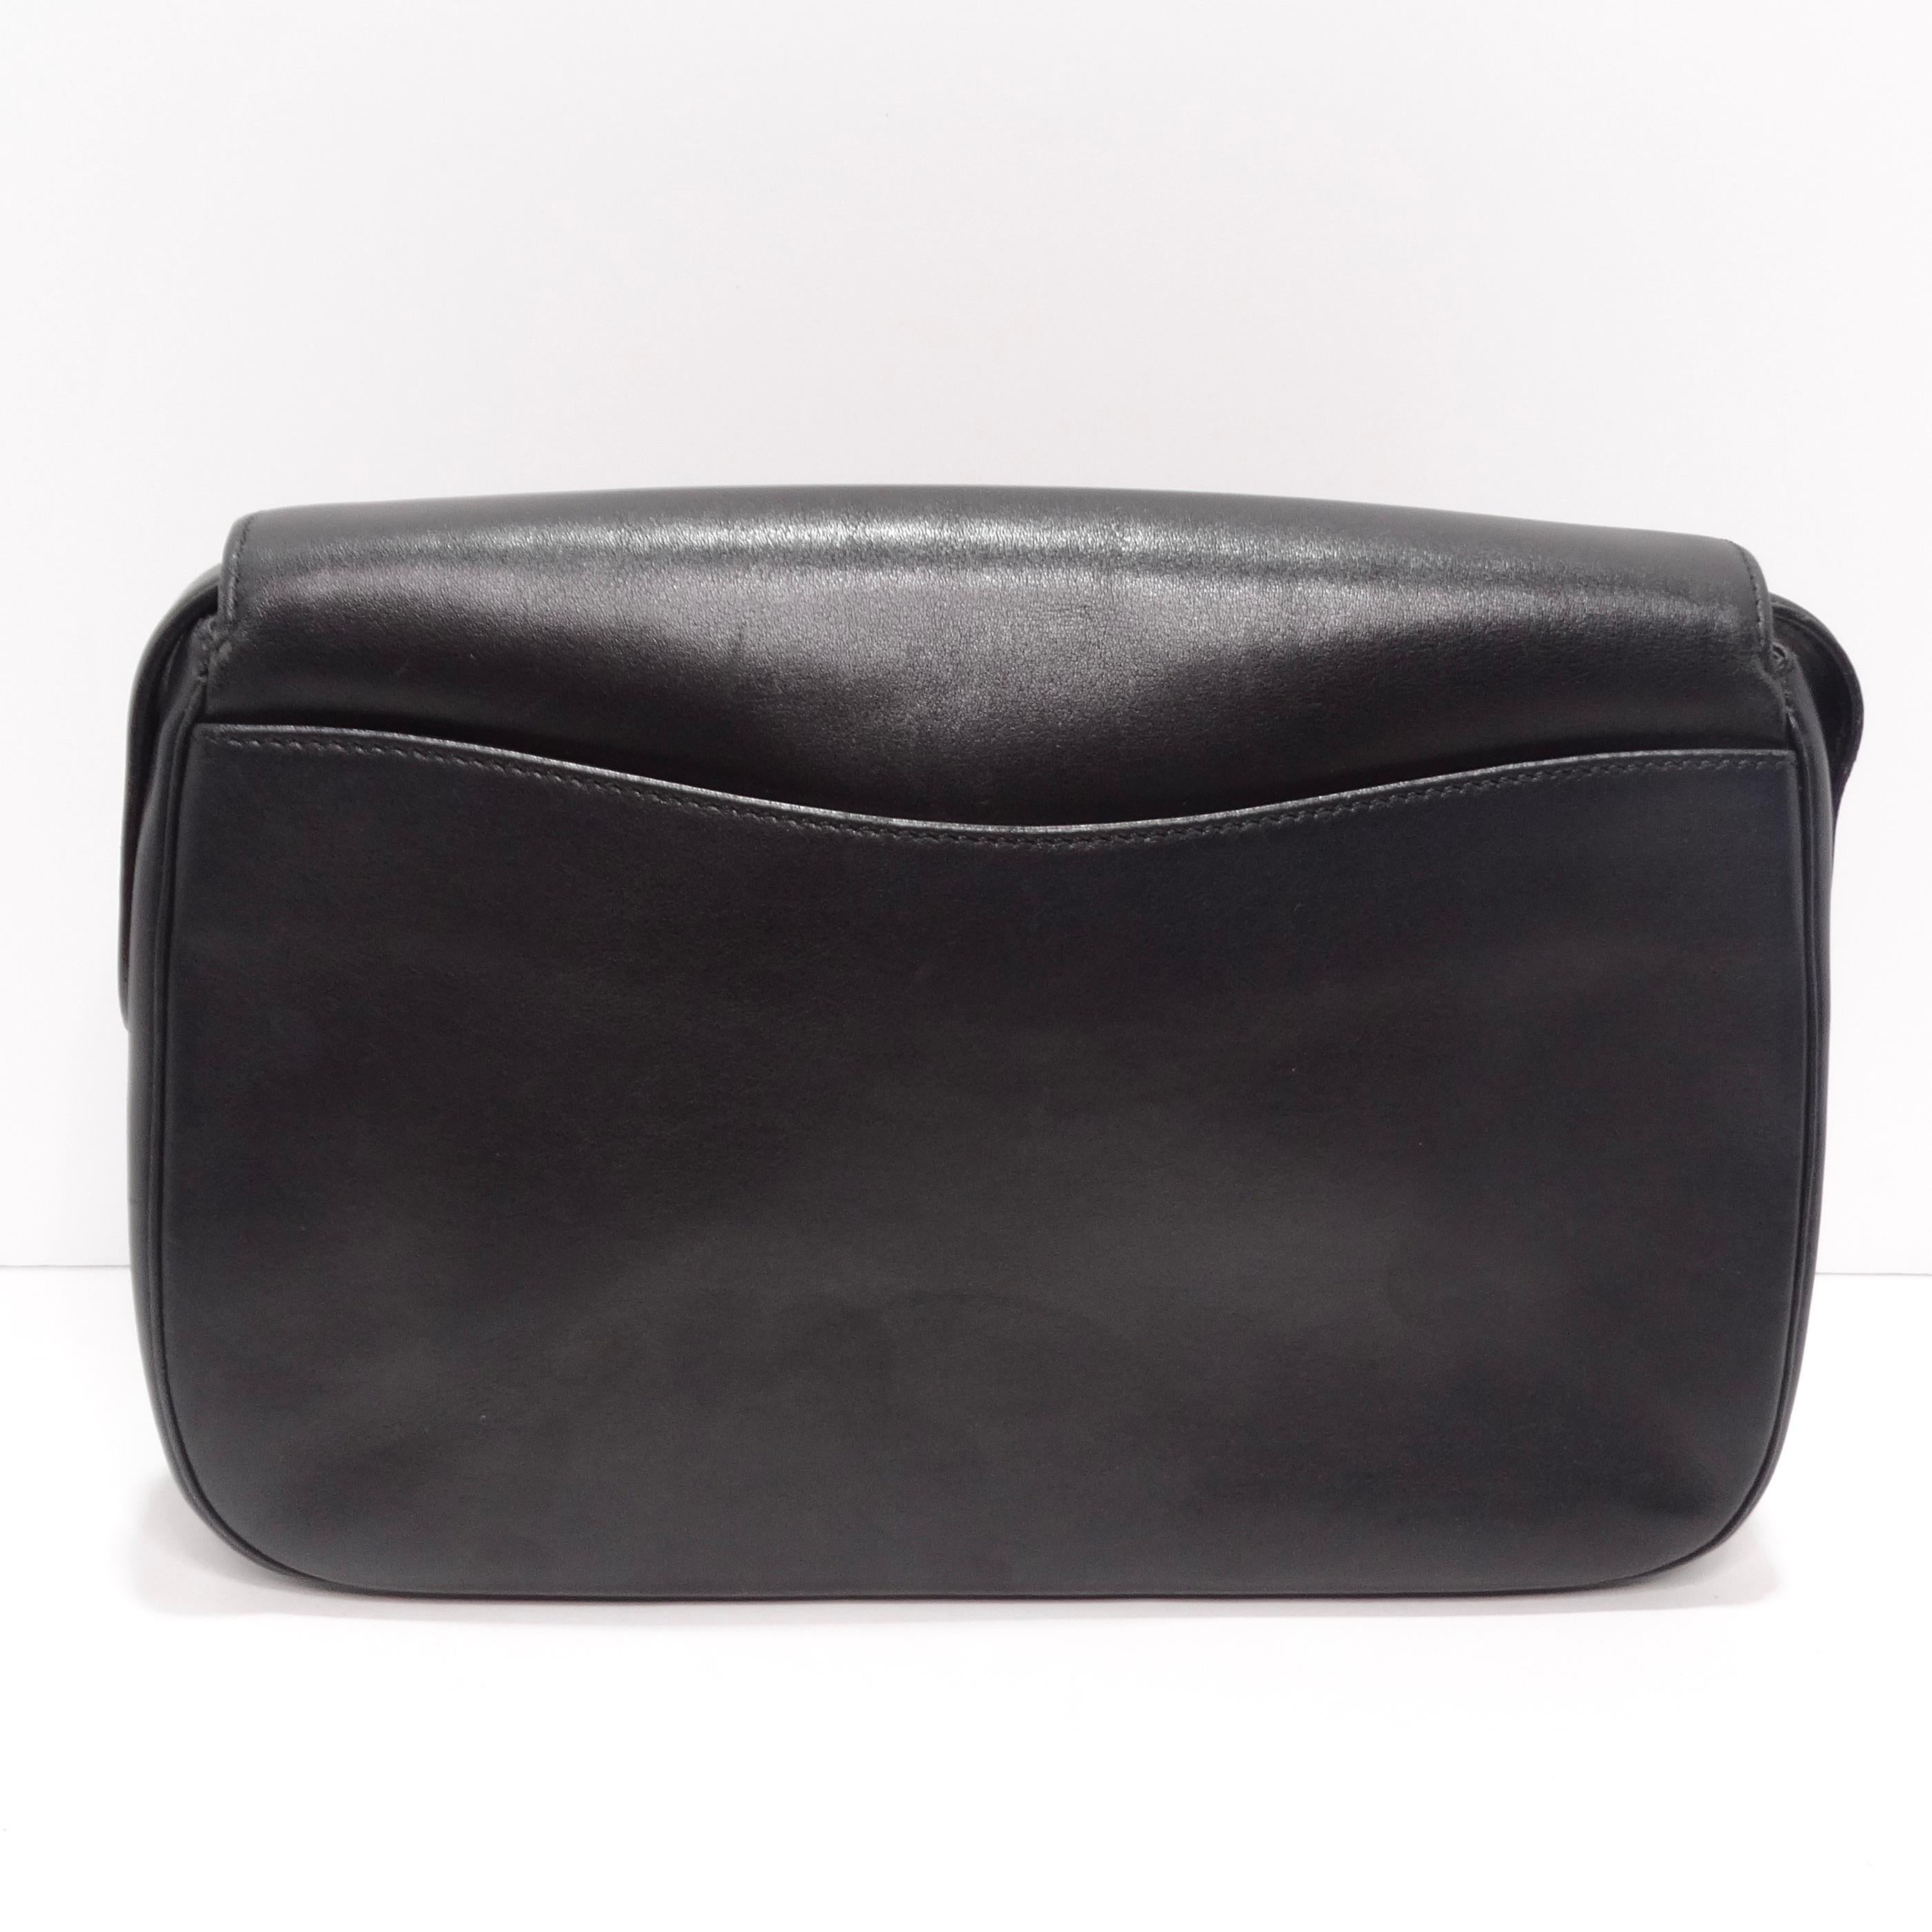 Cartier 1990s Black Leather Classic Panthere Shoulder Bag For Sale 3